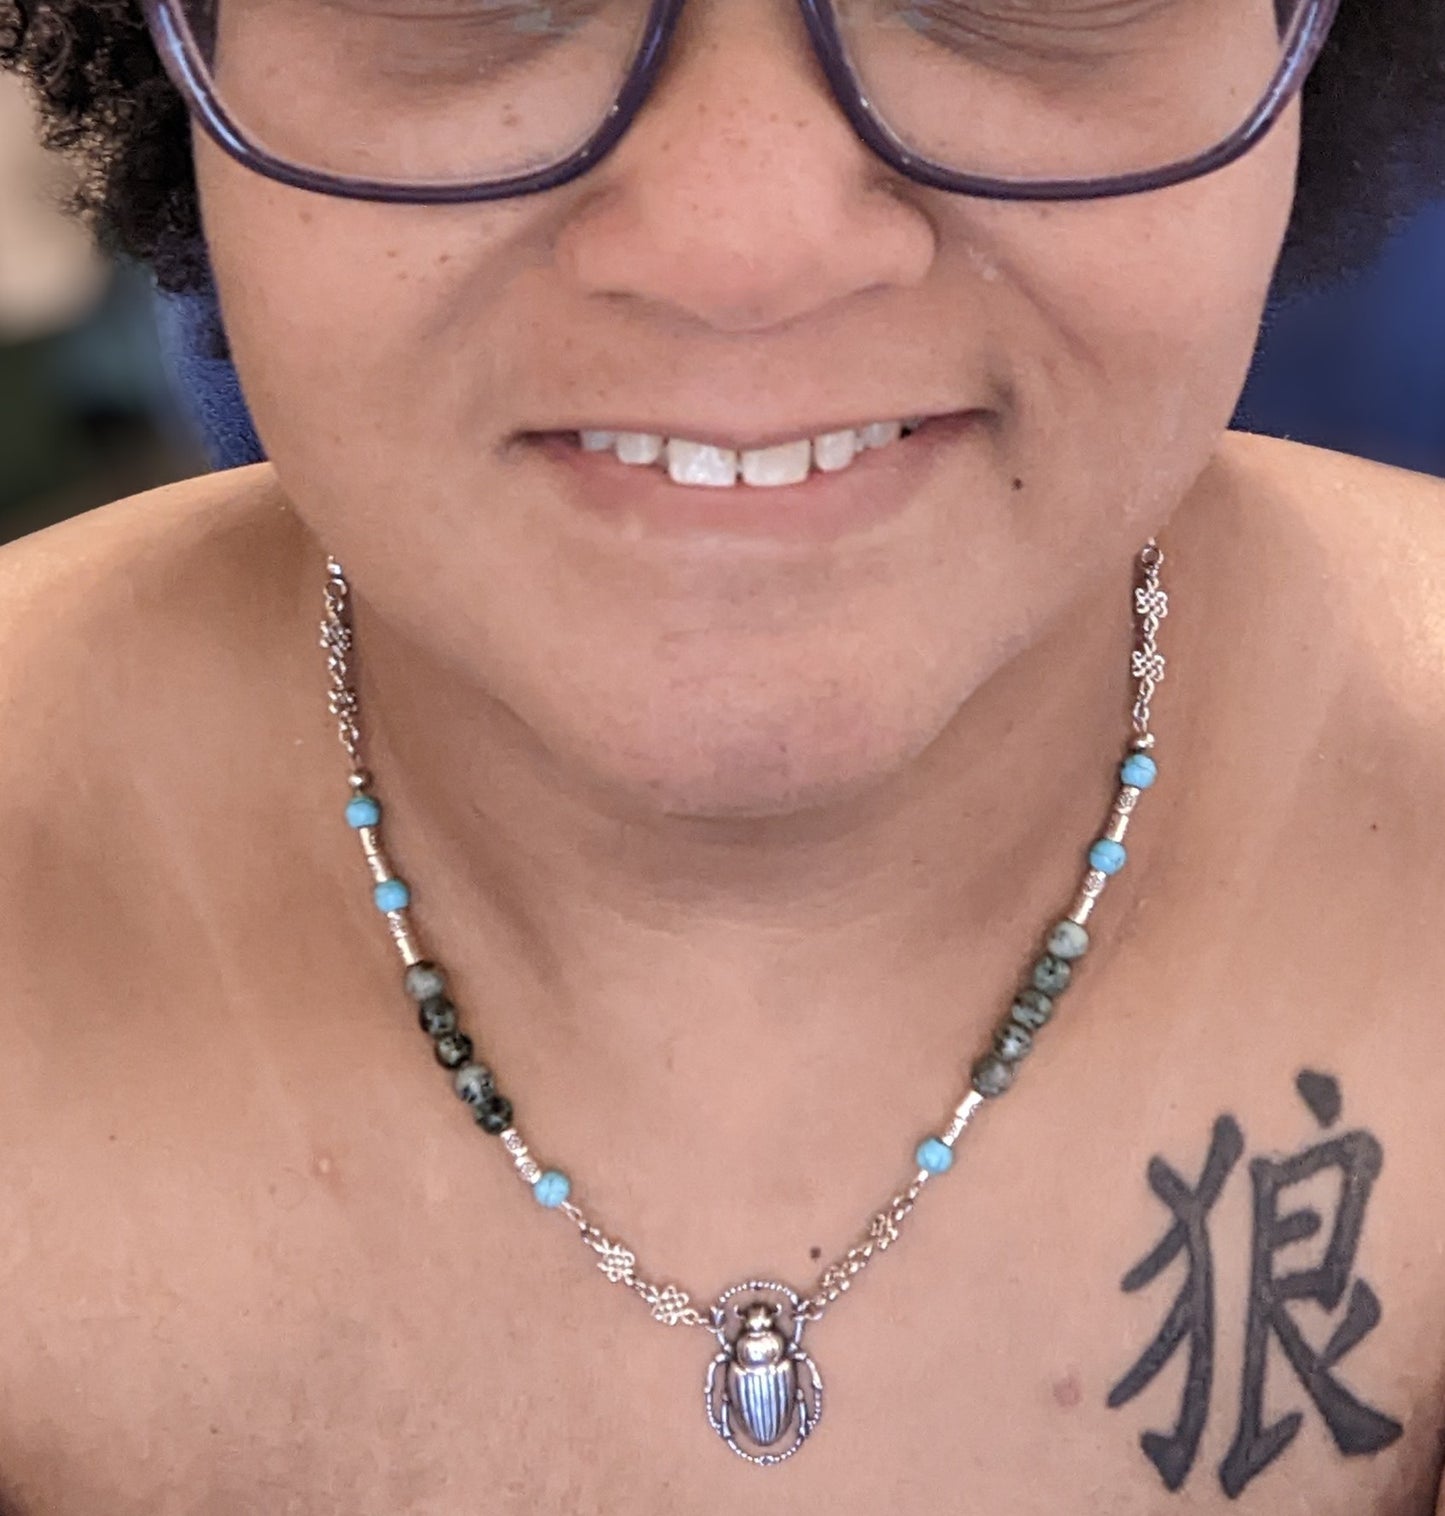 Close up of the neck of a person wearing a beaded necklace.  The necklace has a silver scarab pendant, turquoise and African turquoise beads with silver accents.  